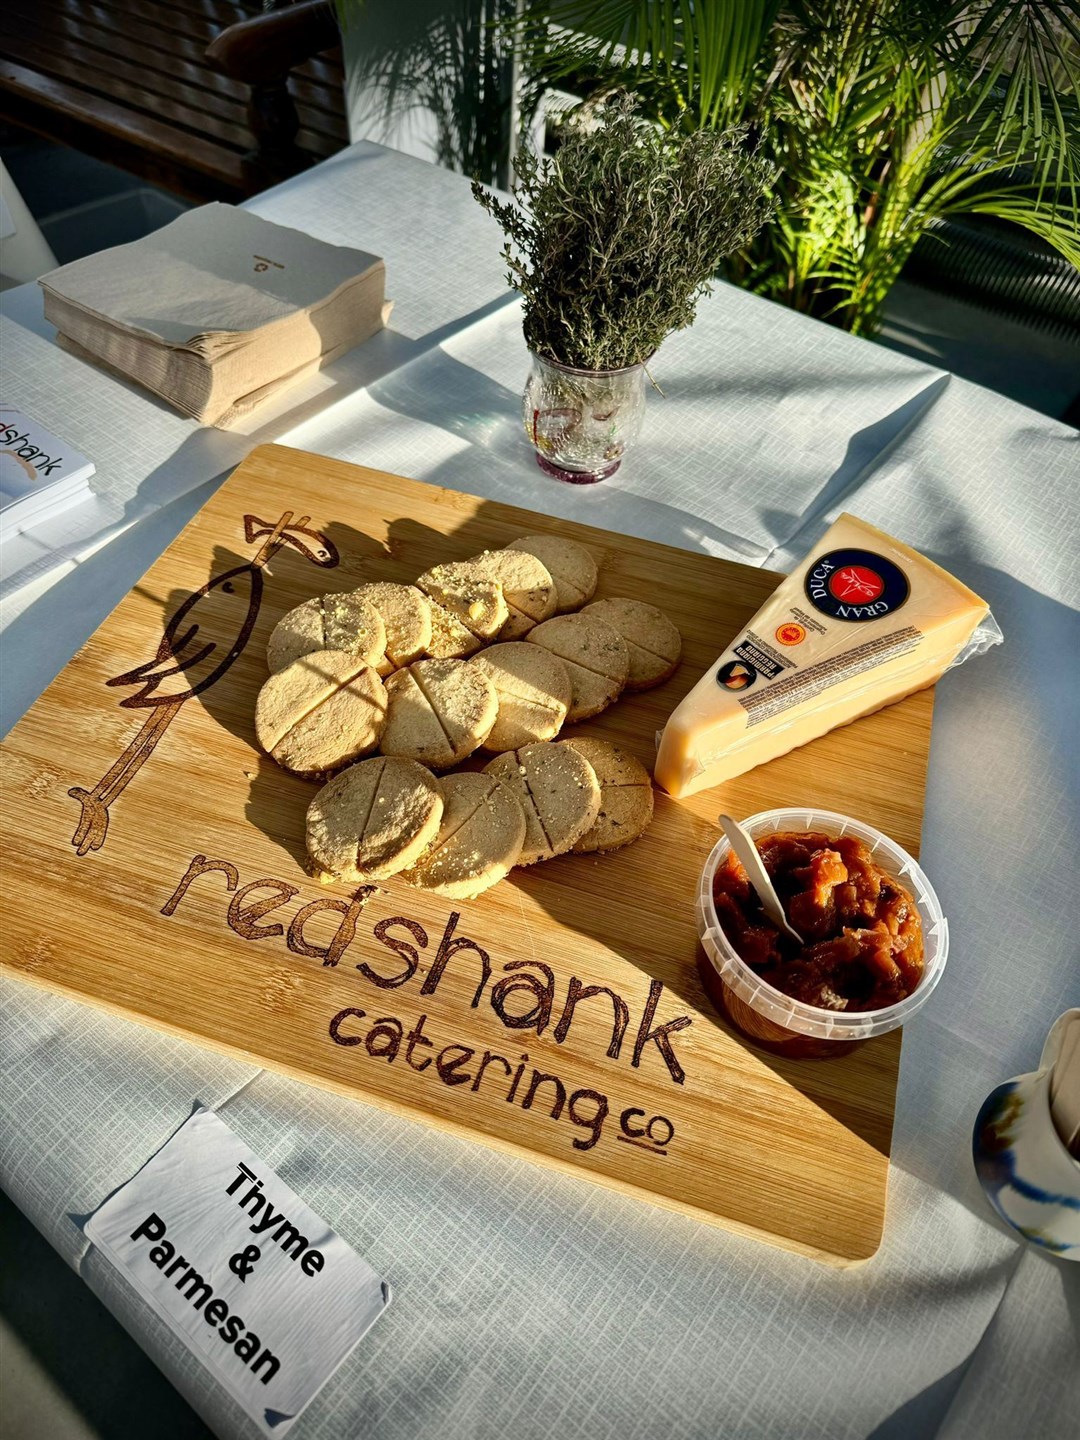 Red Shank Catering had a Thyme and Parmesan offering. Photo: Visit Inverness Loch Ness